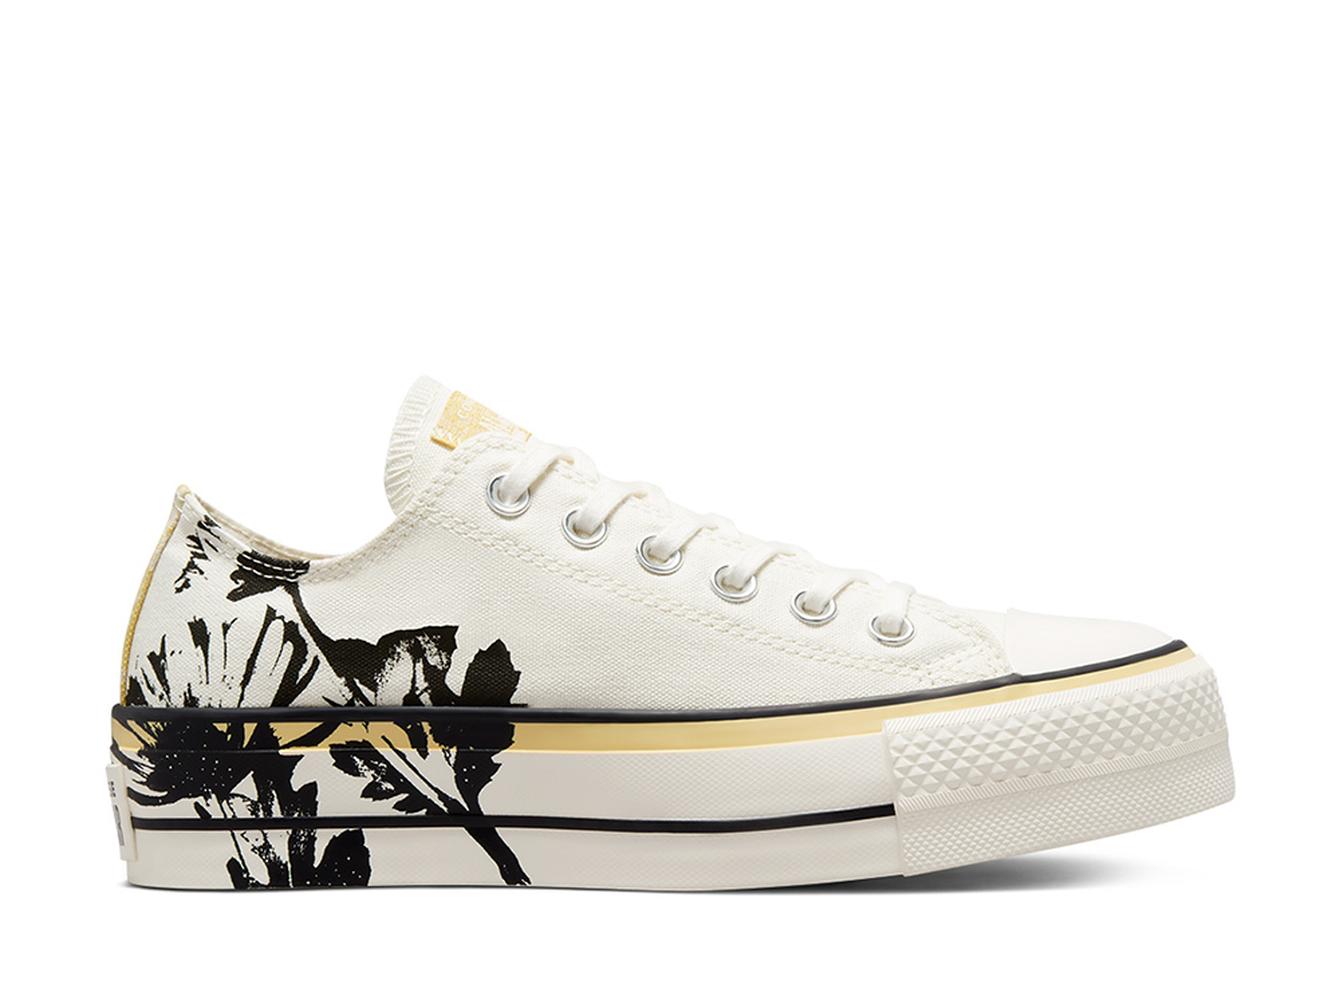 Chuck Taylor All Star Floral Fusion Lift